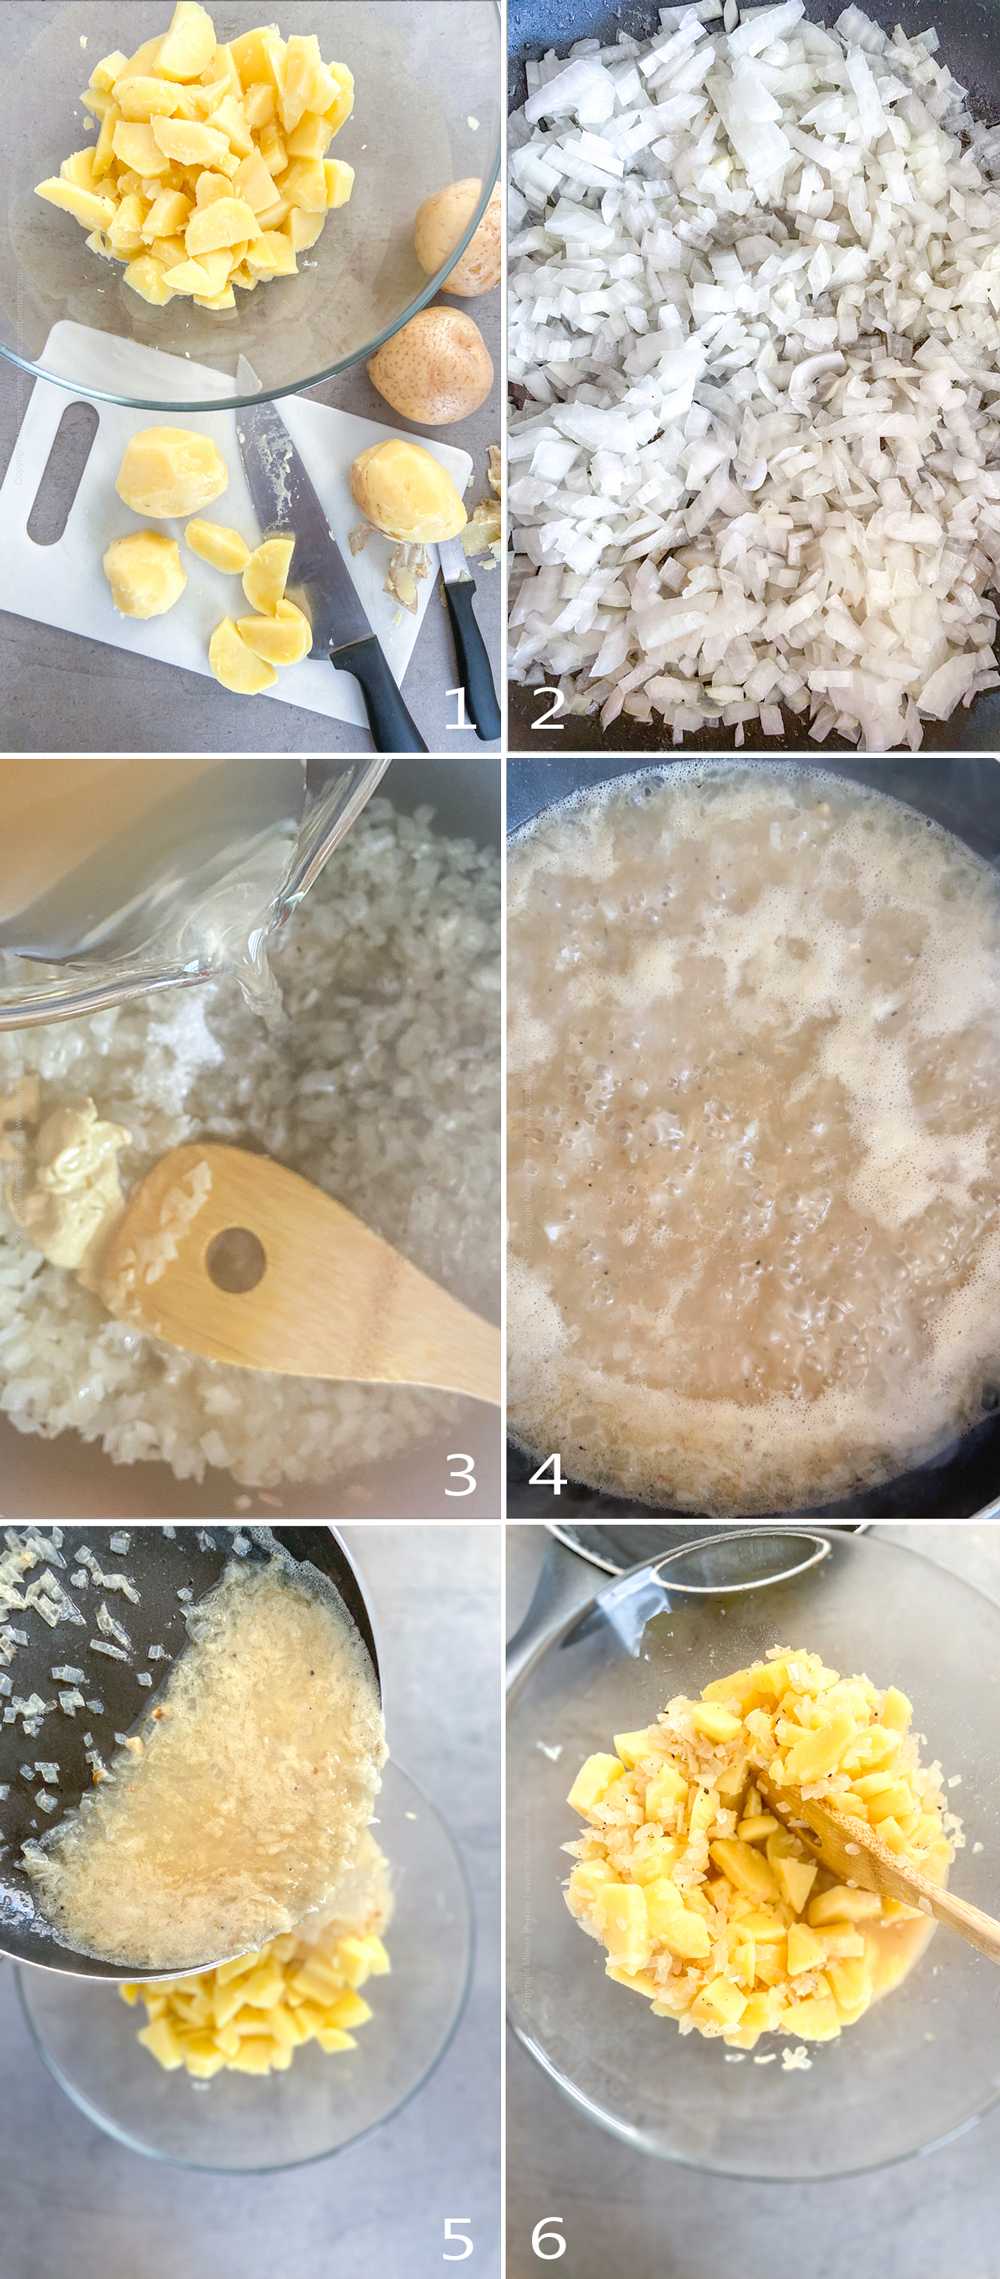 Workflow images showing the steps to make Bavarian potato salad